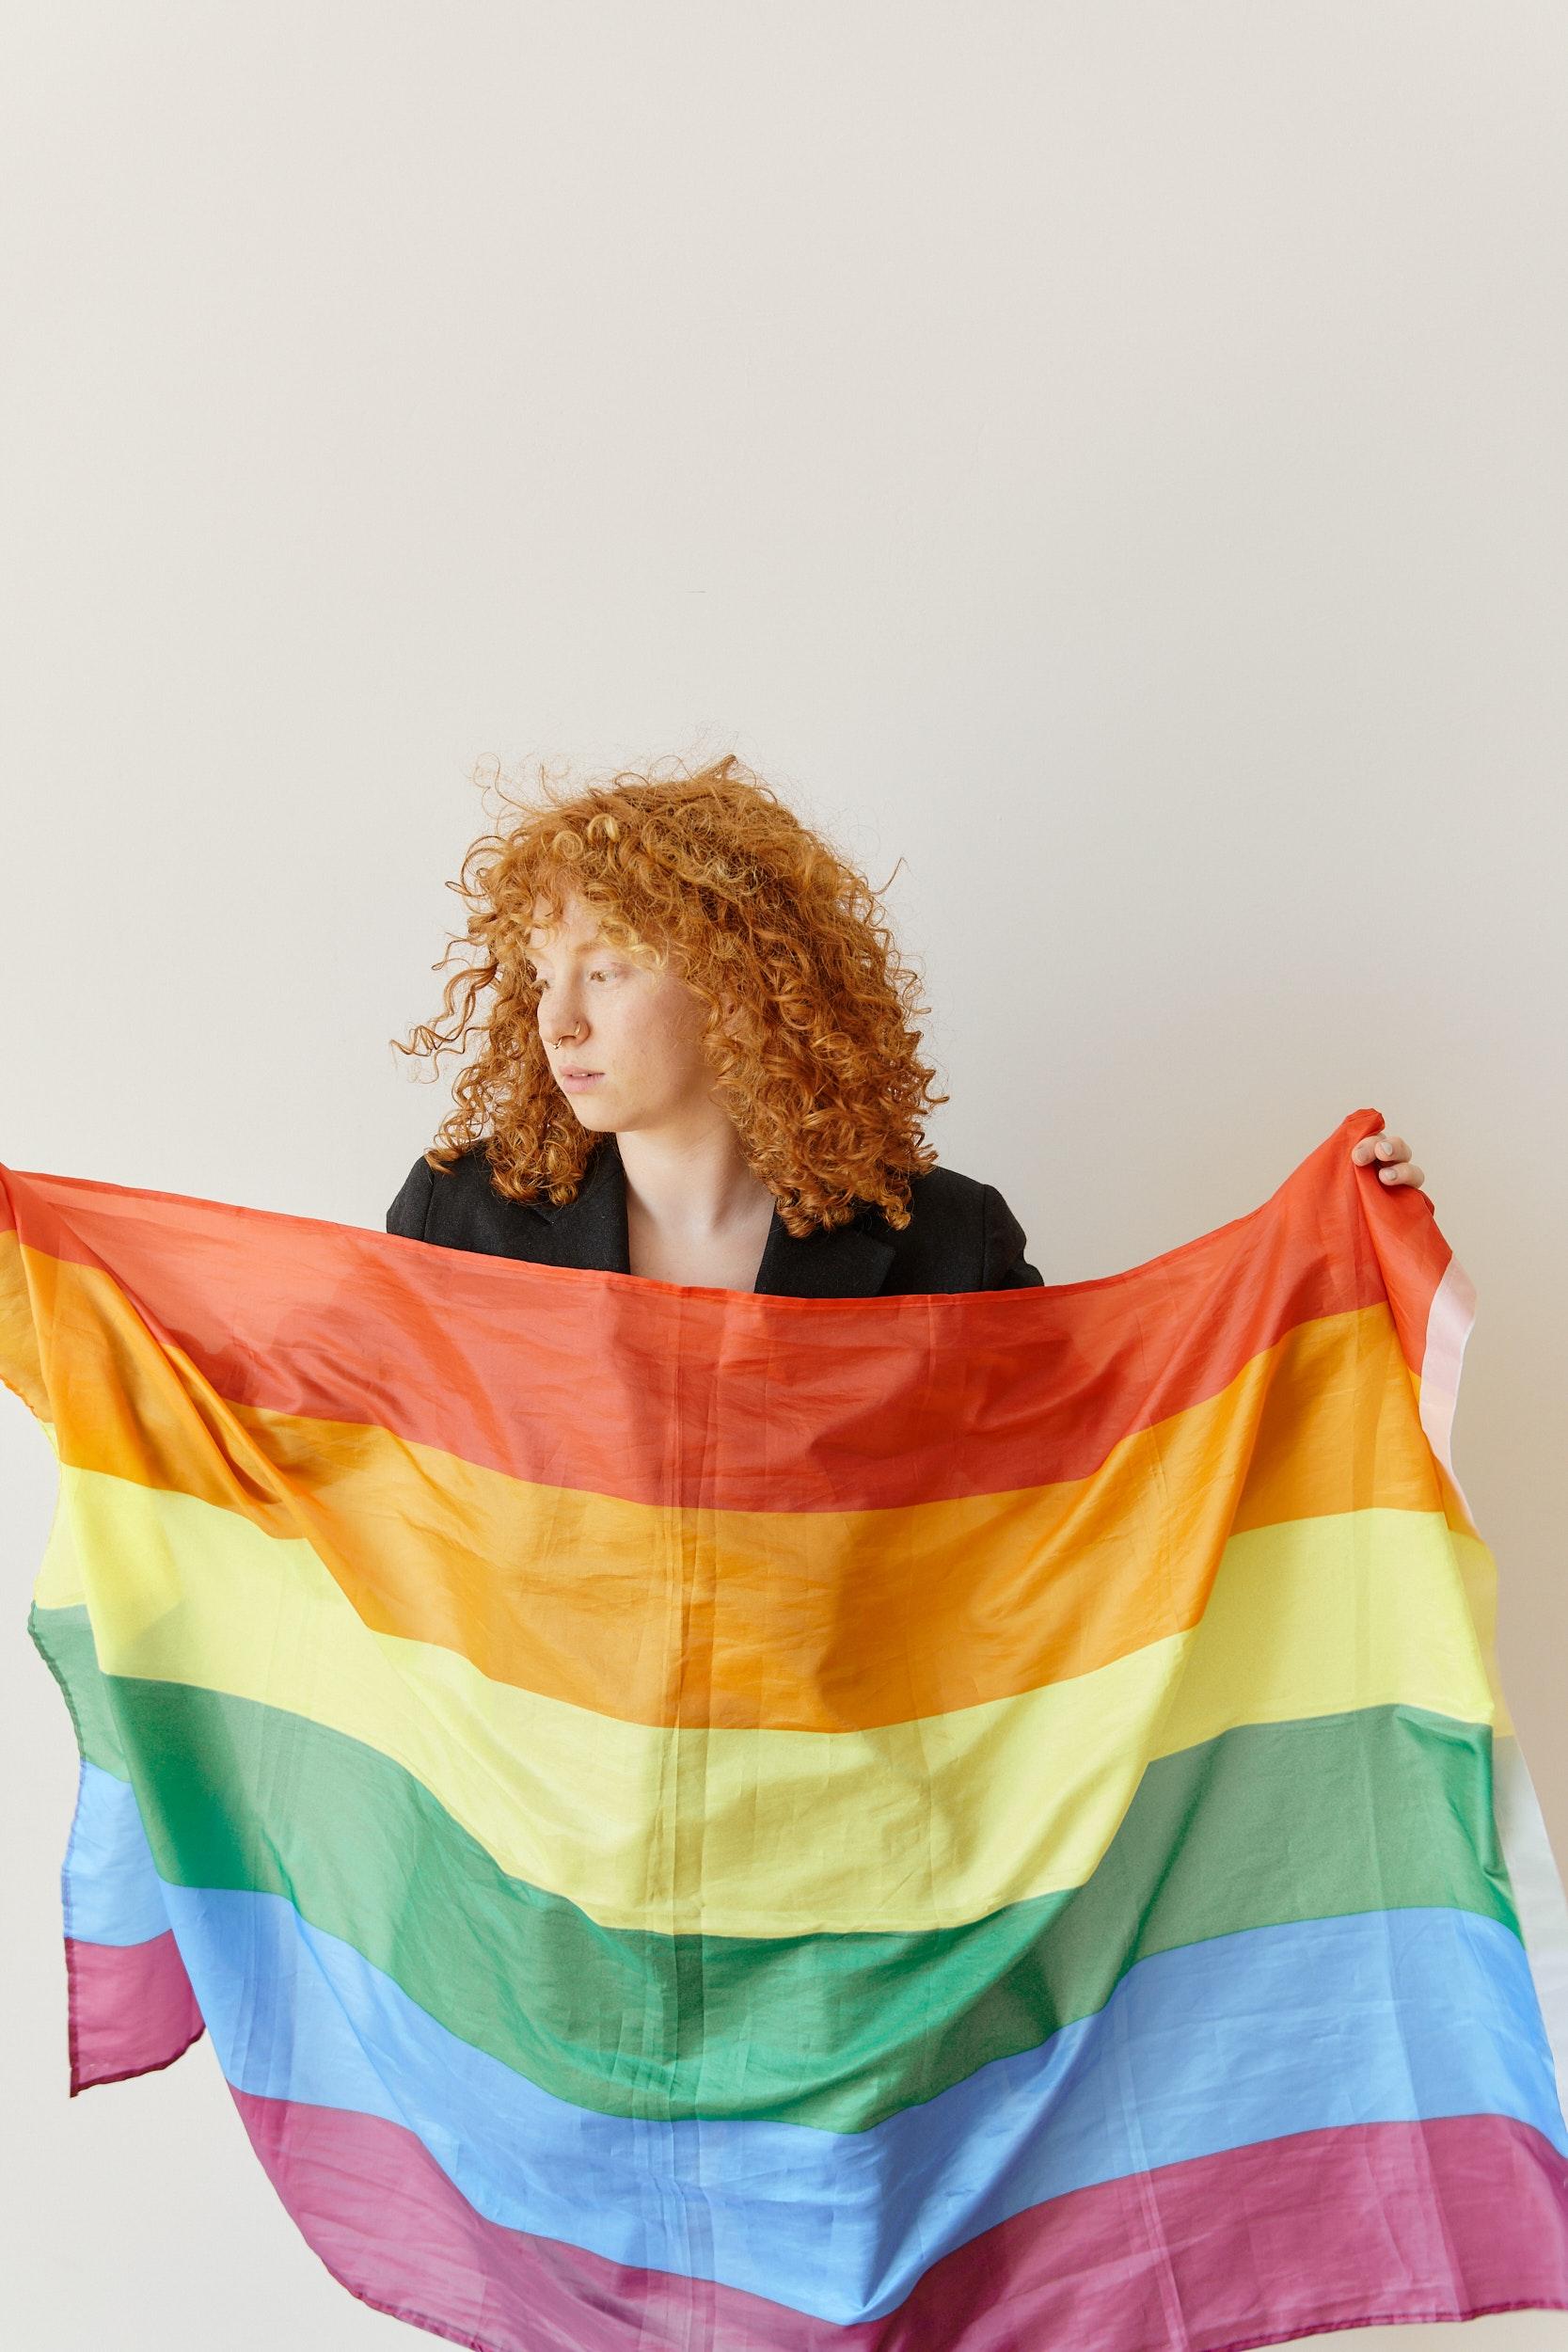  How To Hang A Pride Flag On A Wall 